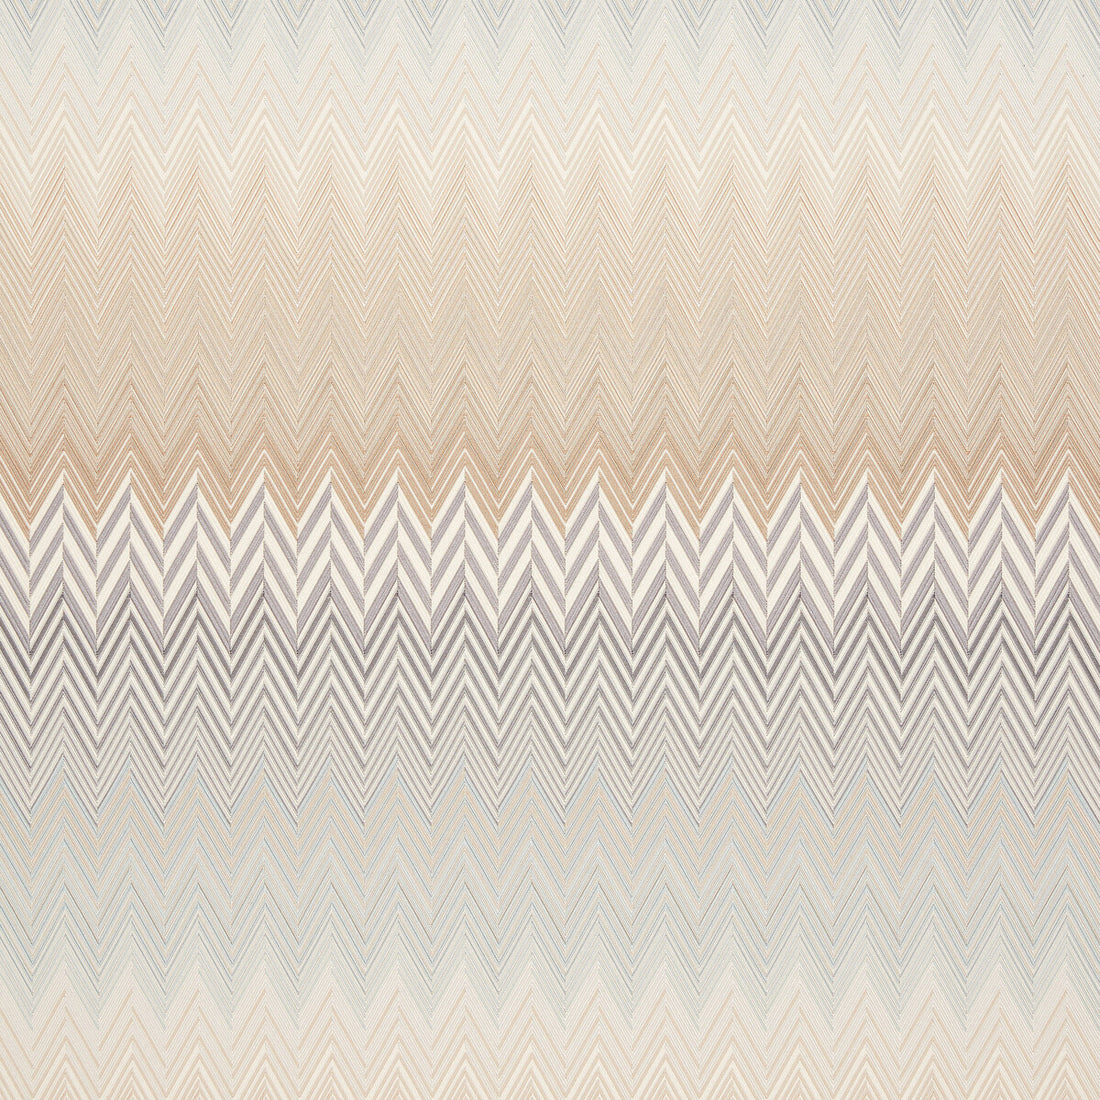 Bastia Fr fabric in 148 color - pattern 36705.1611.0 - by Kravet Couture in the Missoni Home collection